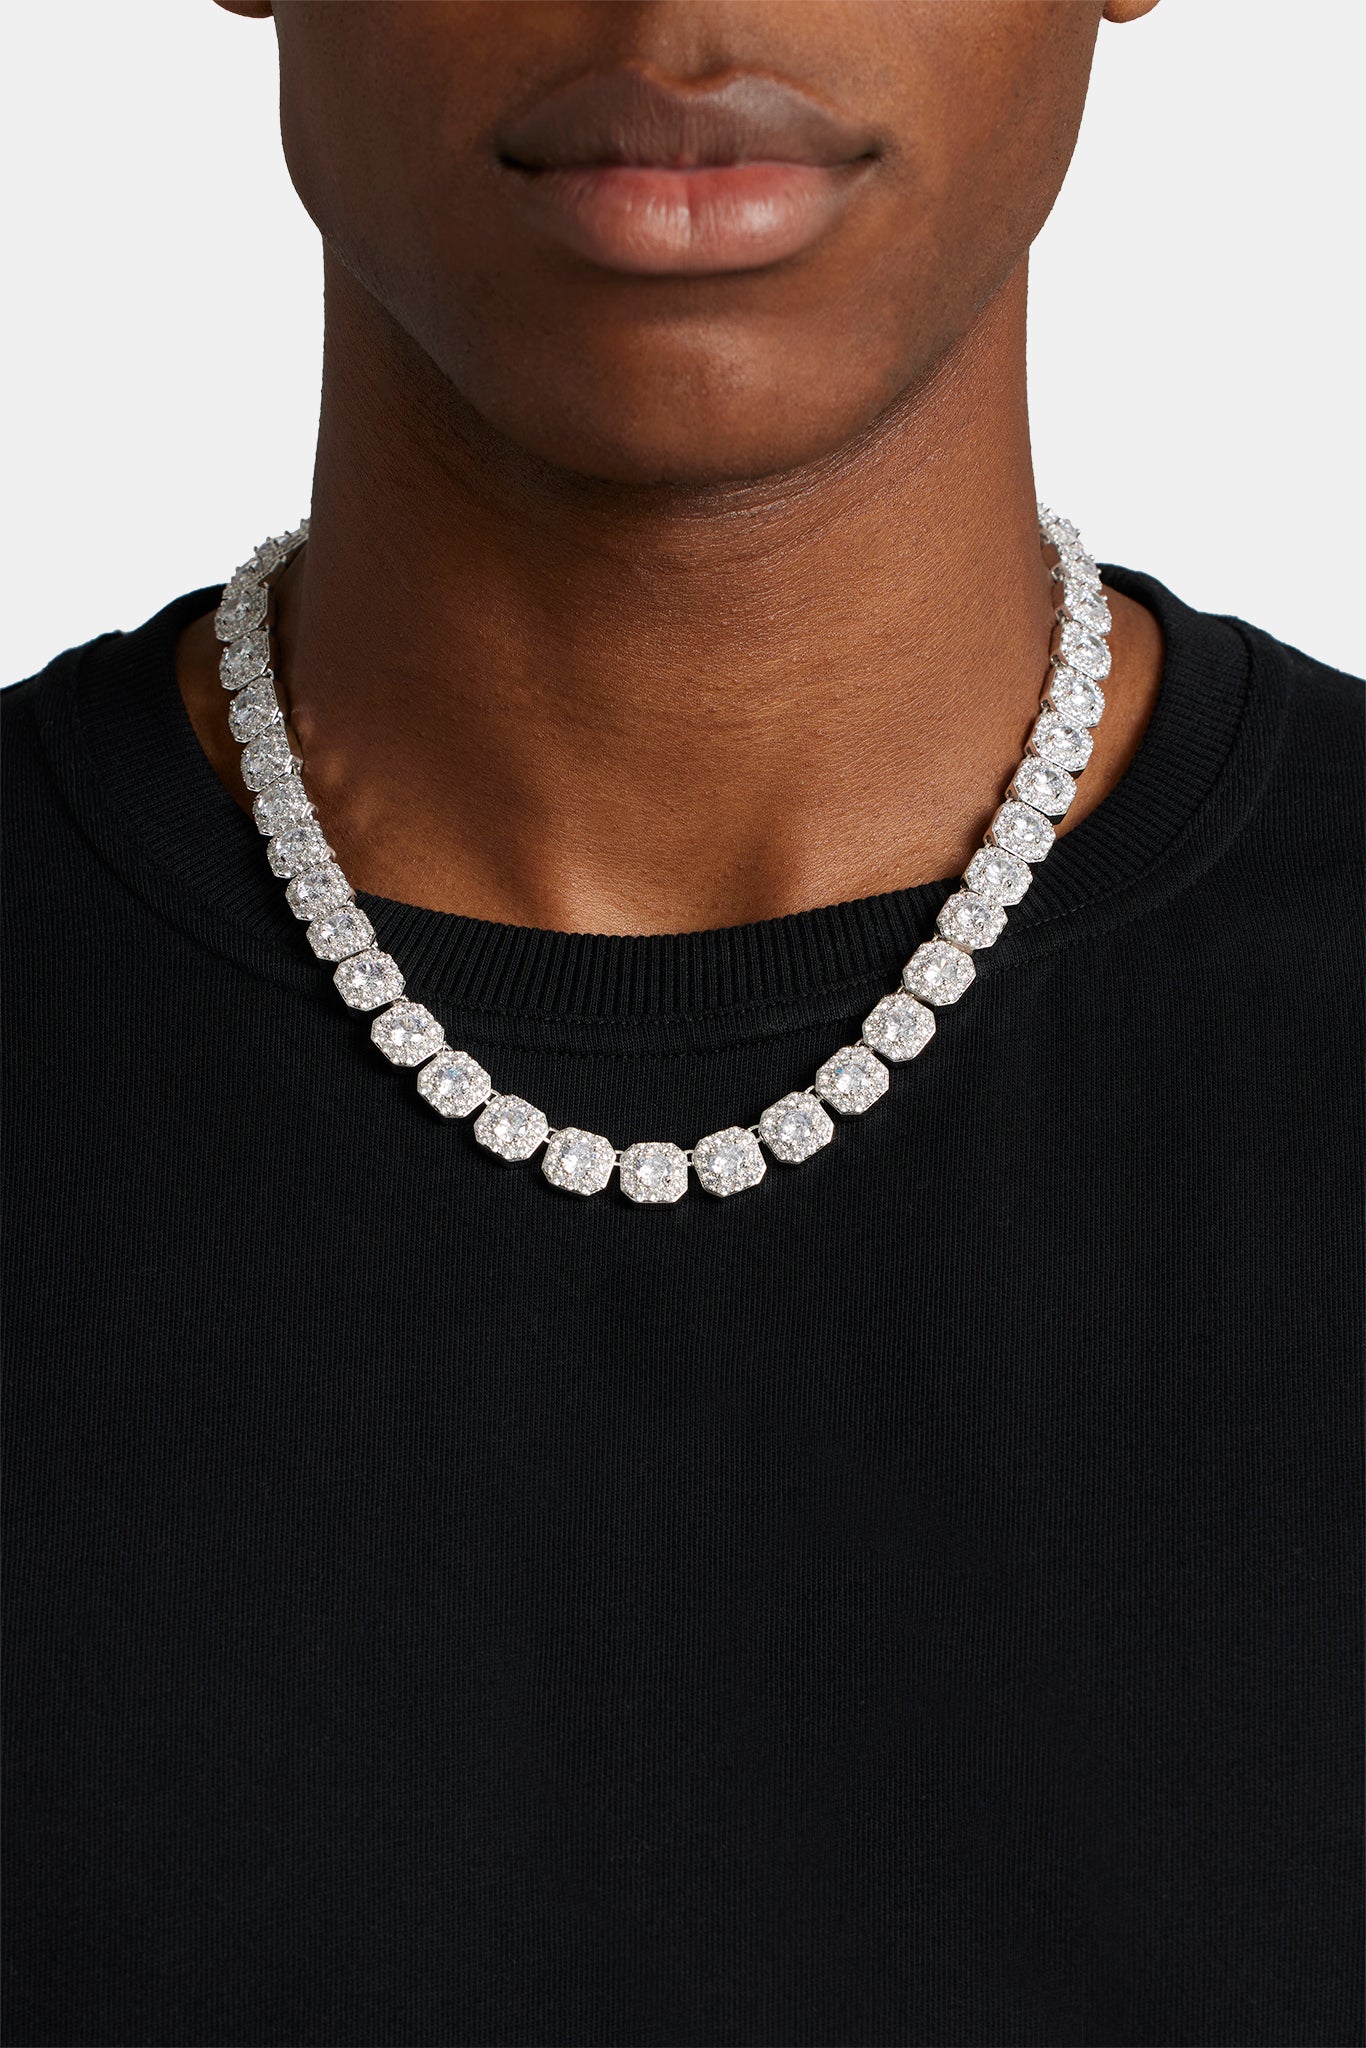 Classic 925 Sterling Silver Tennis Chain Diamond Tennis Necklace With VVS  Moissanite Diamond Cluster For Men Fine 3mm 10mm From Xjl666, $67.33 |  DHgate.Com